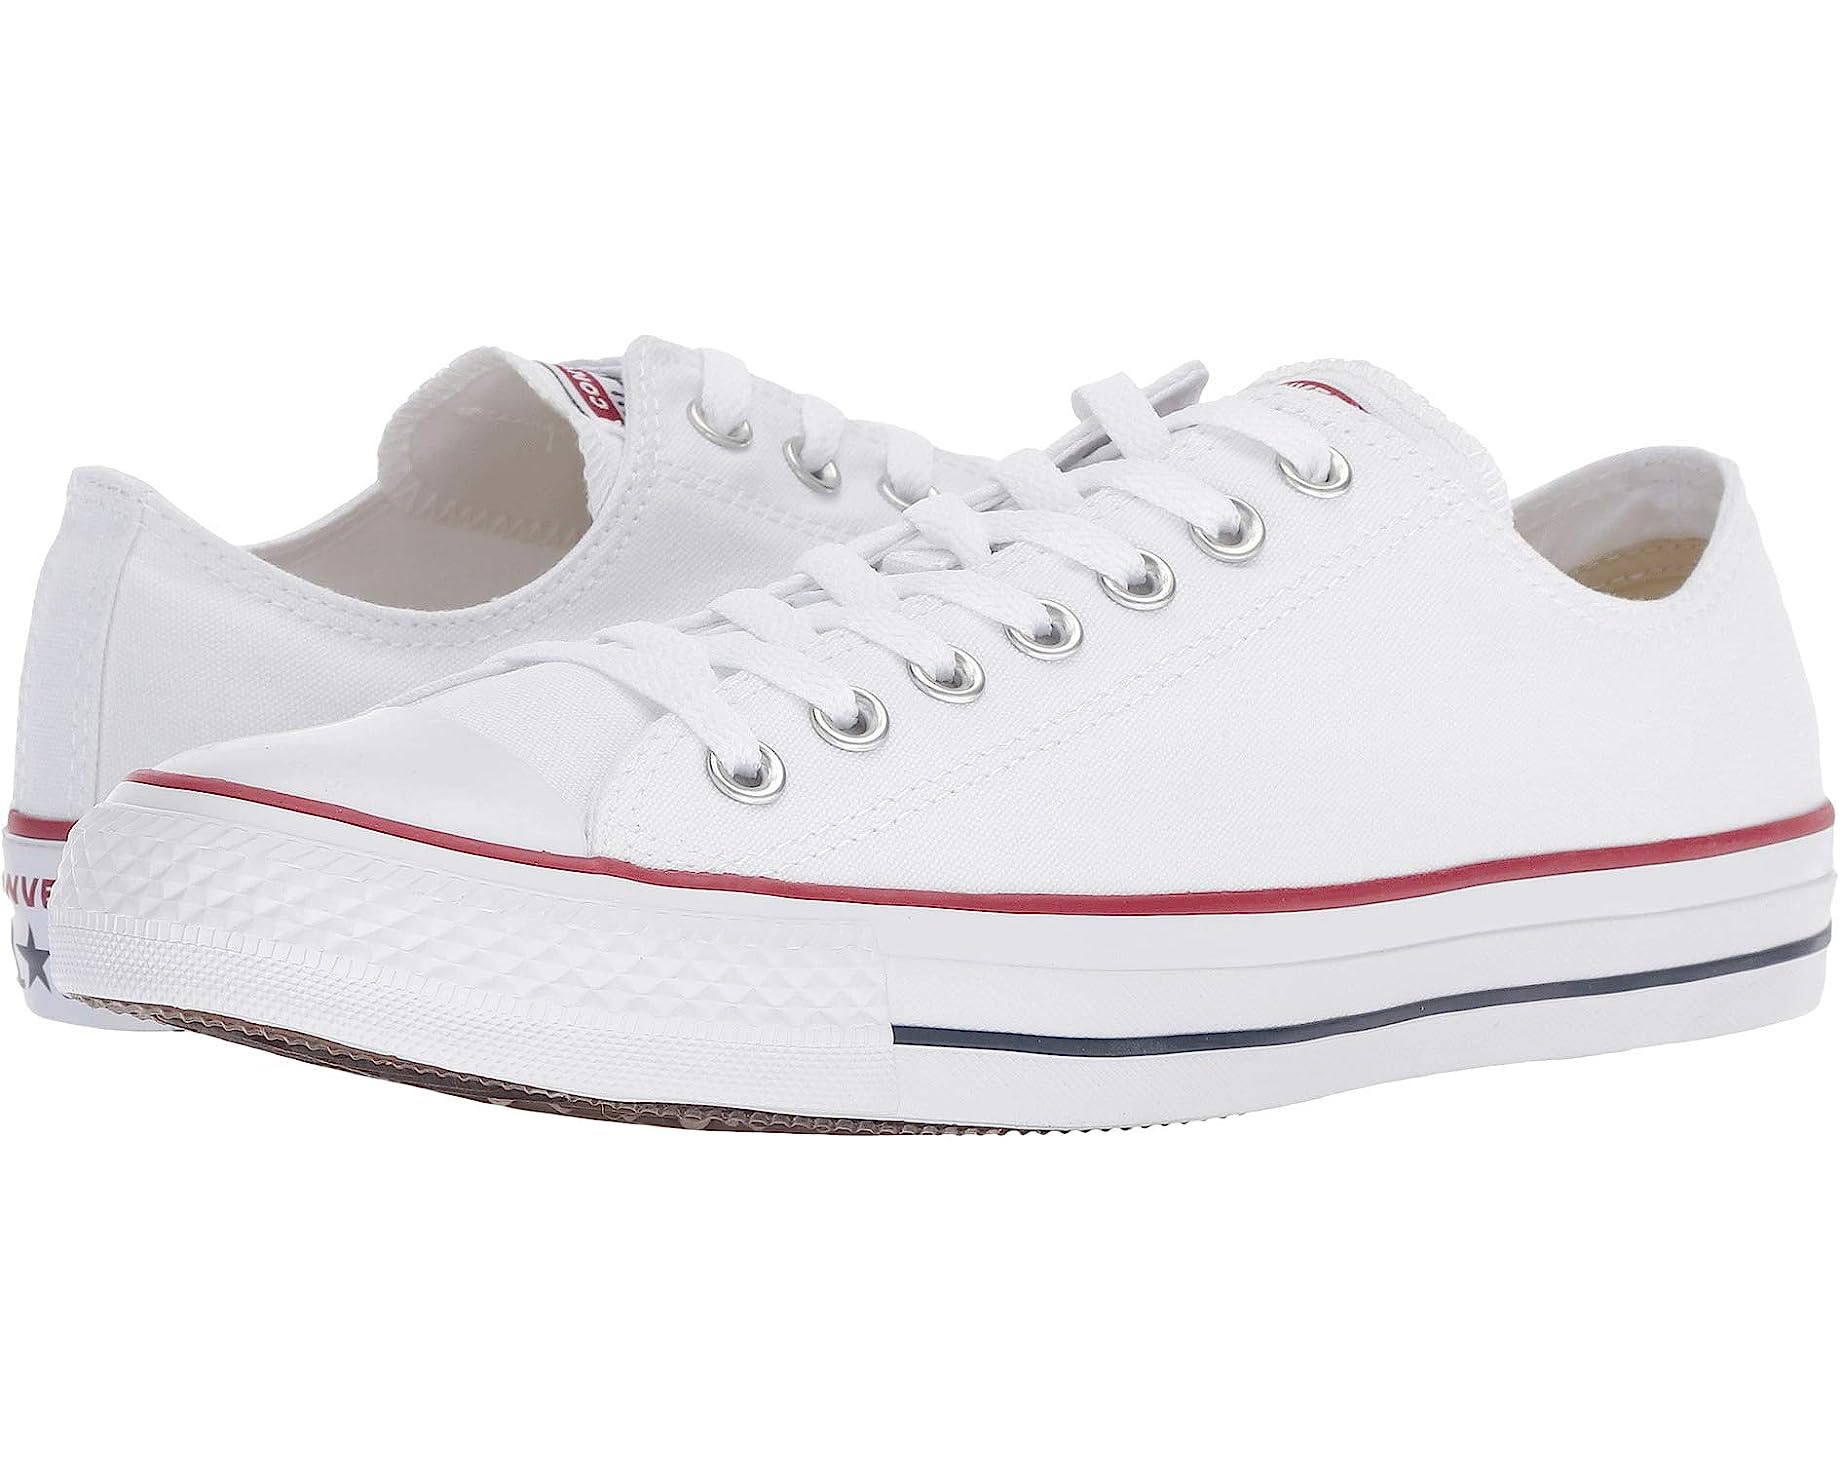 Converse Mens Chuck Taylor All Star Sneakers White